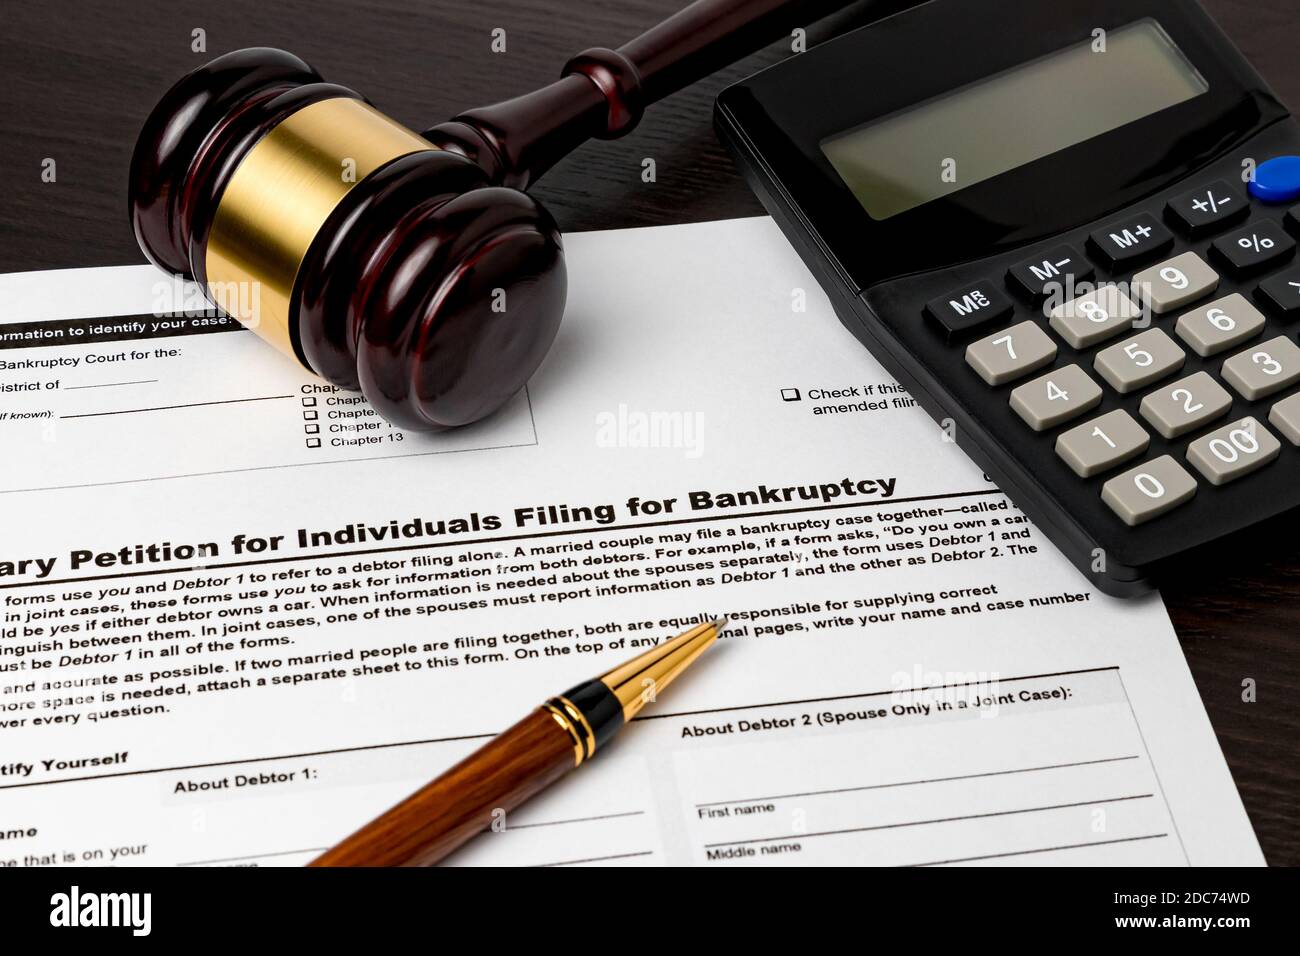 Bankruptcy petition for individuals with calculator and gavel. Concept of financial and unemployment crisis, personal debt, economy and recession. Stock Photo